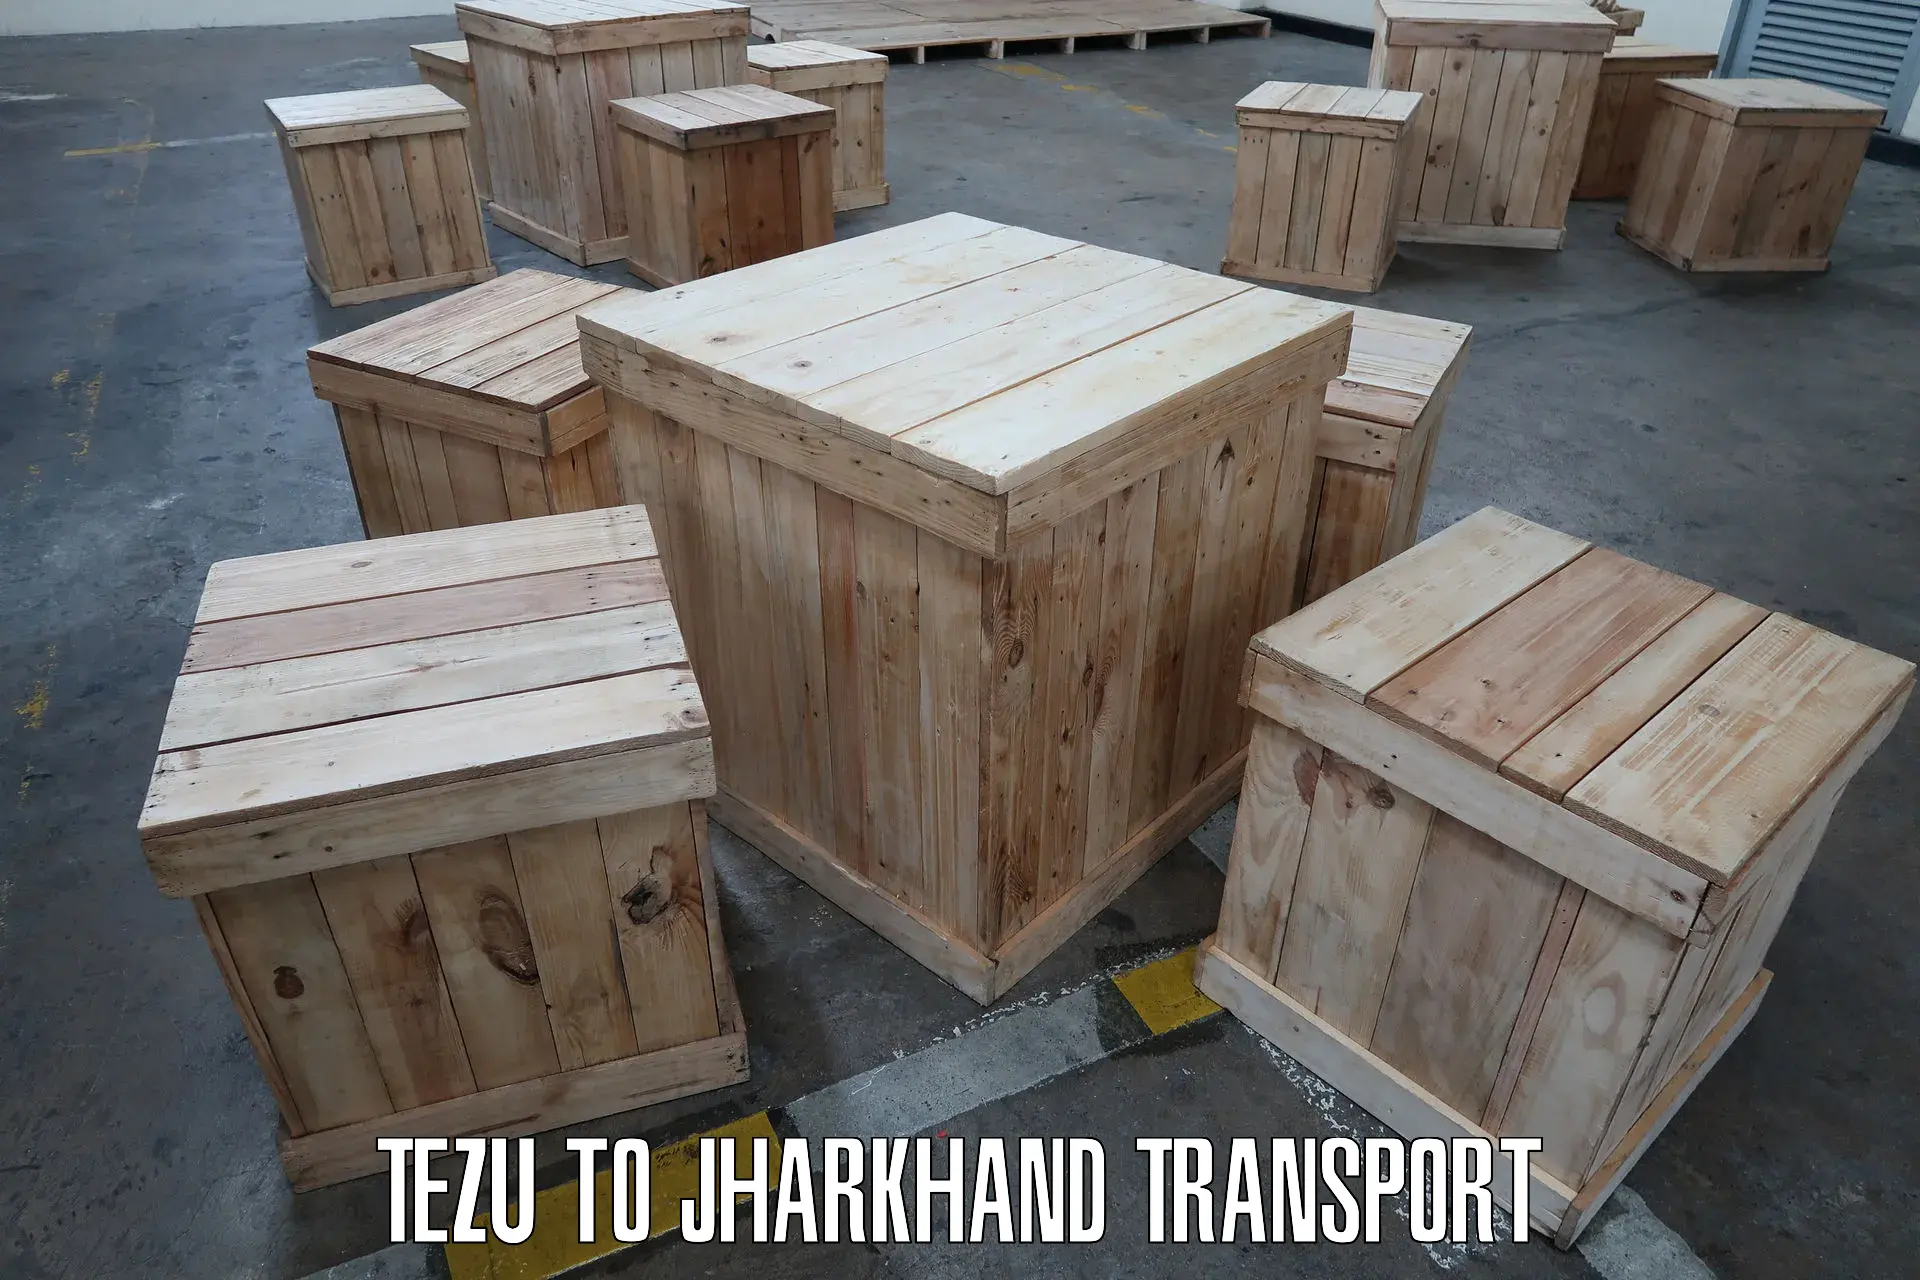 Commercial transport service Tezu to Peterbar